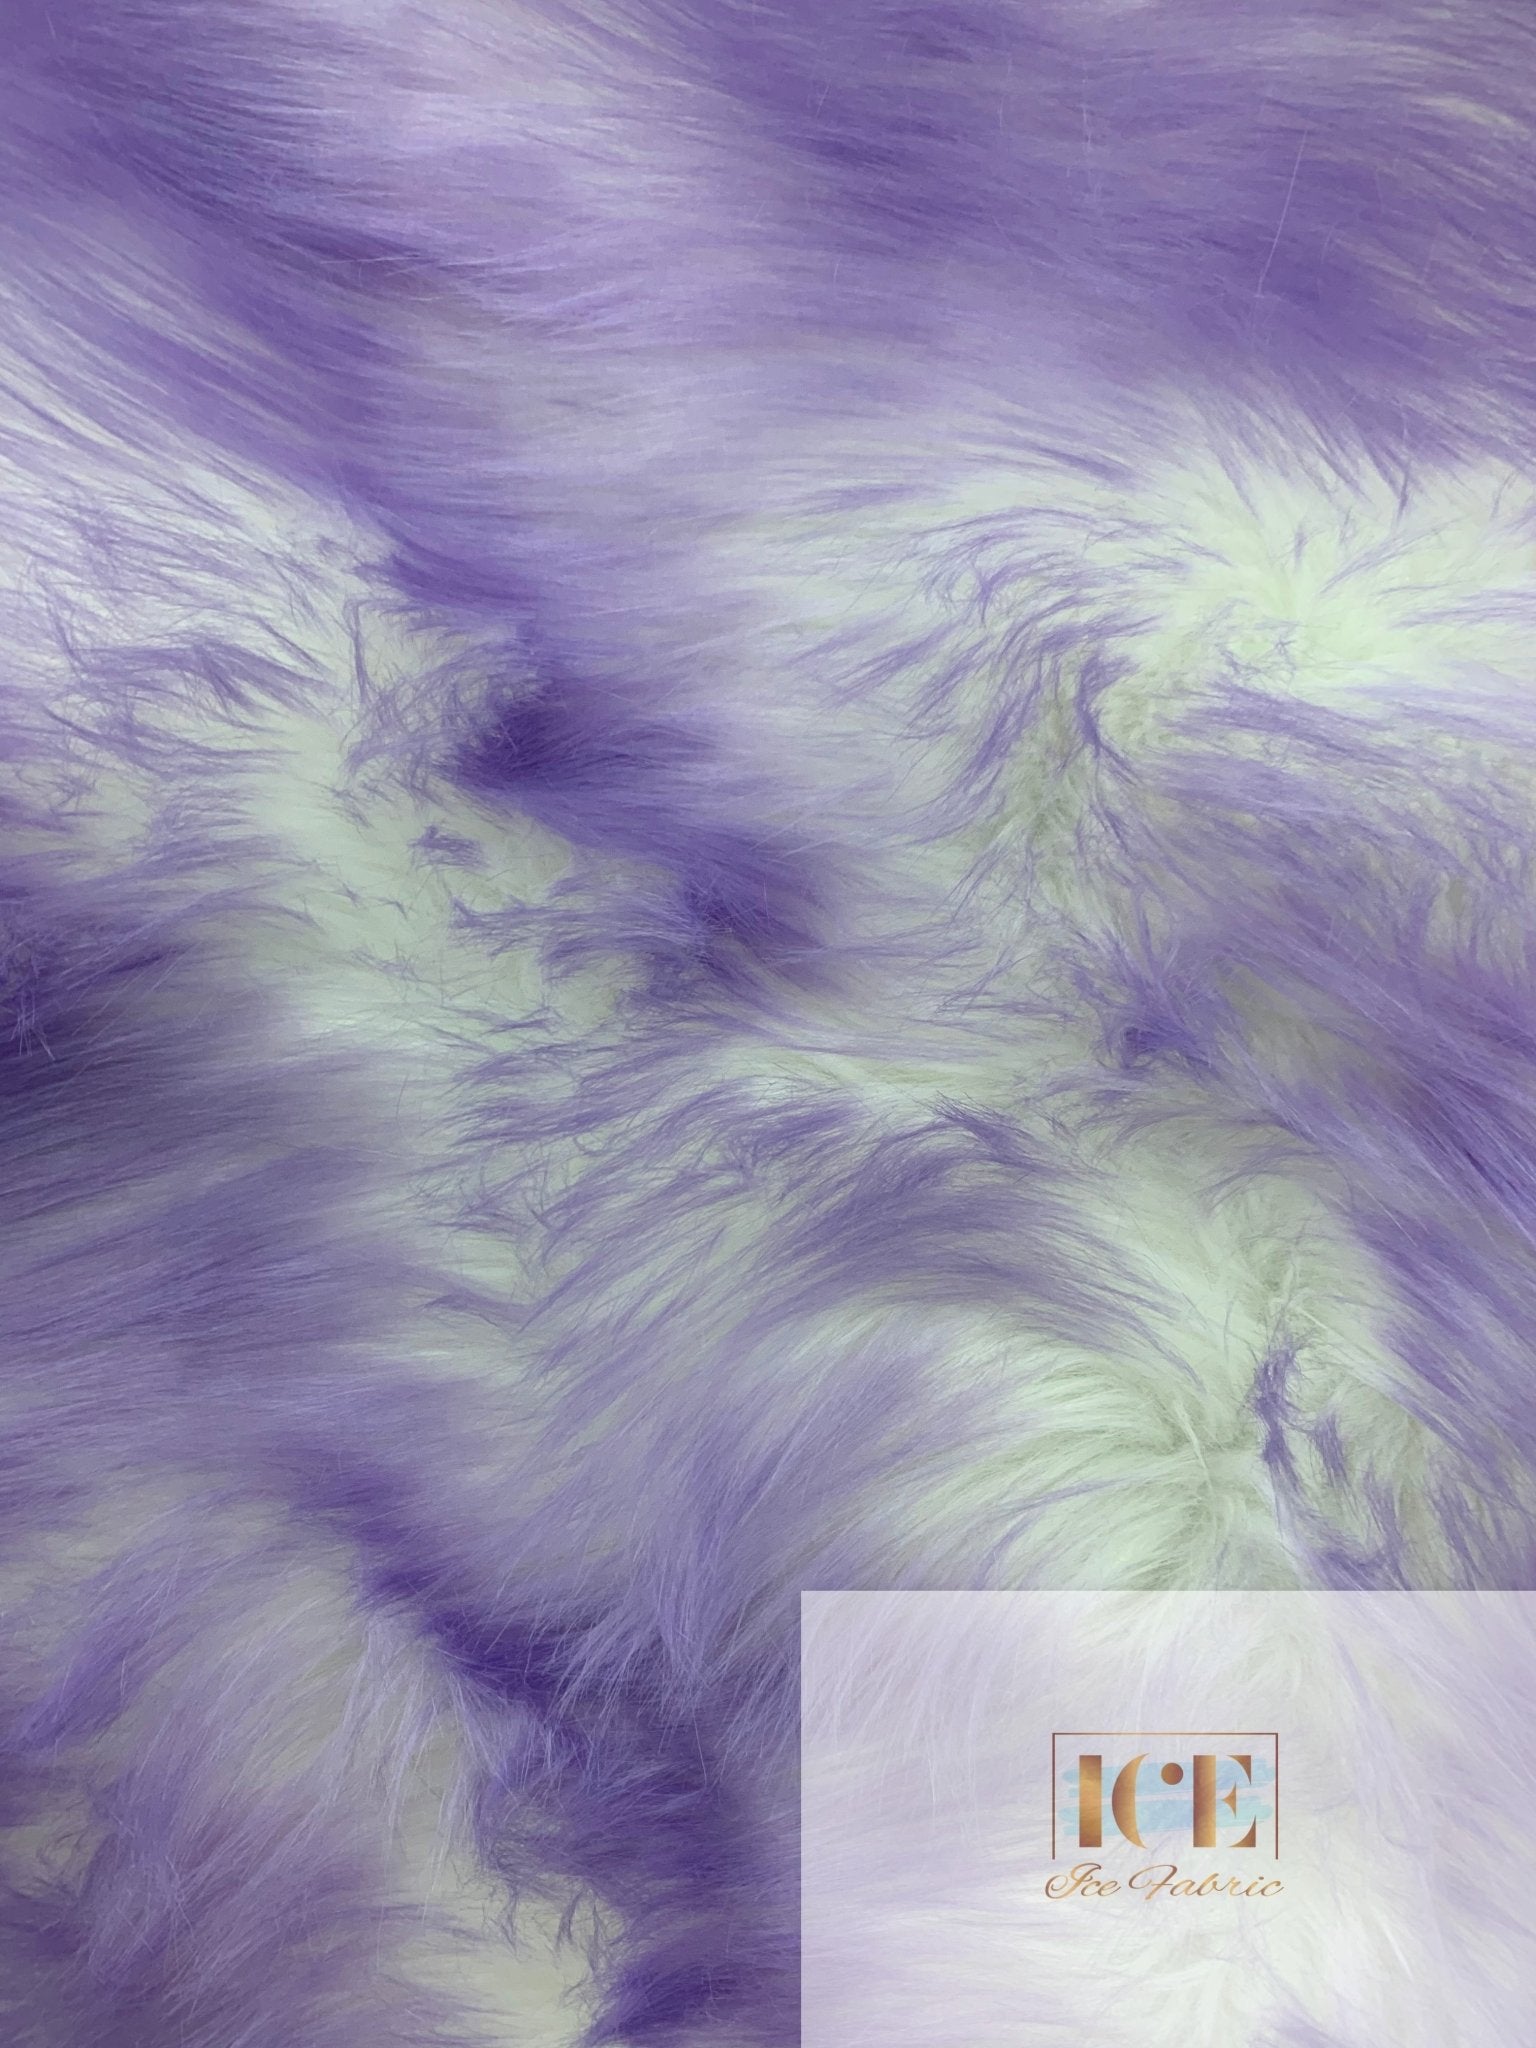 Canadian Fox 2 Tone Shaggy Long Pile Faux Fur Fabric For Blankets, Costumes, Bed SpreadICEFABRICICE FABRICSLilacBy The Yard (60 inches Wide)Canadian Fox 2 Tone Shaggy Long Pile Faux Fur Fabric For Blankets, Costumes, Bed Spread ICEFABRIC Lilac